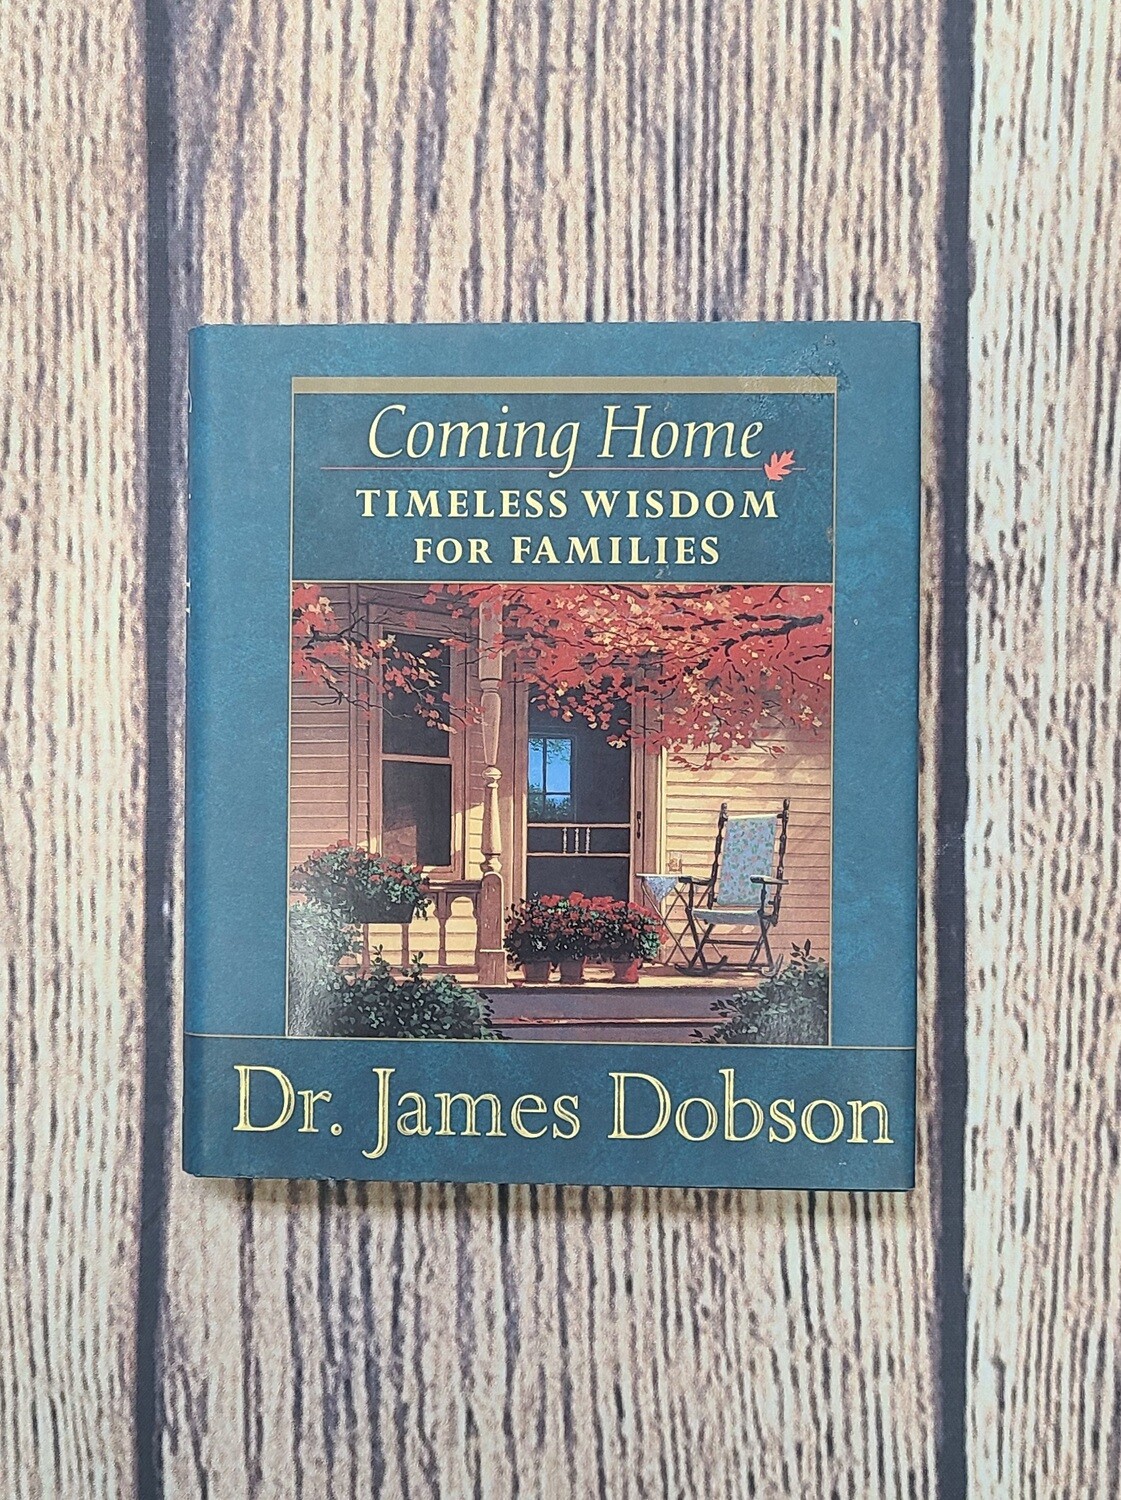 Coming Home: Timeless Wisdom for Families by Dr. James Dobson